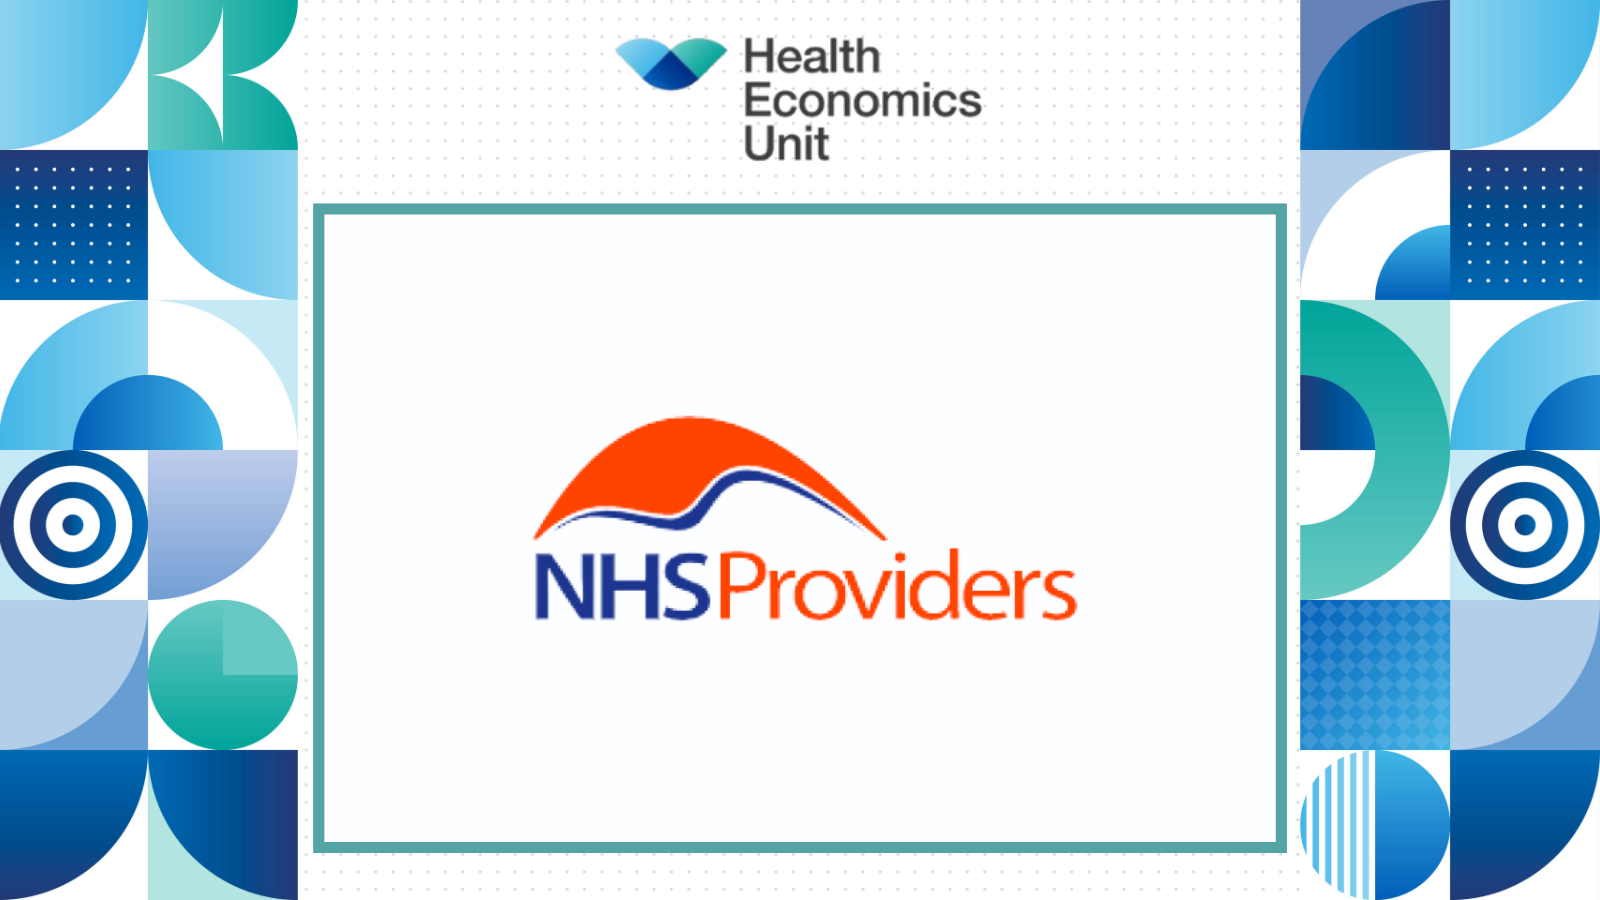 NHS Providers HEU_SoMe_cards